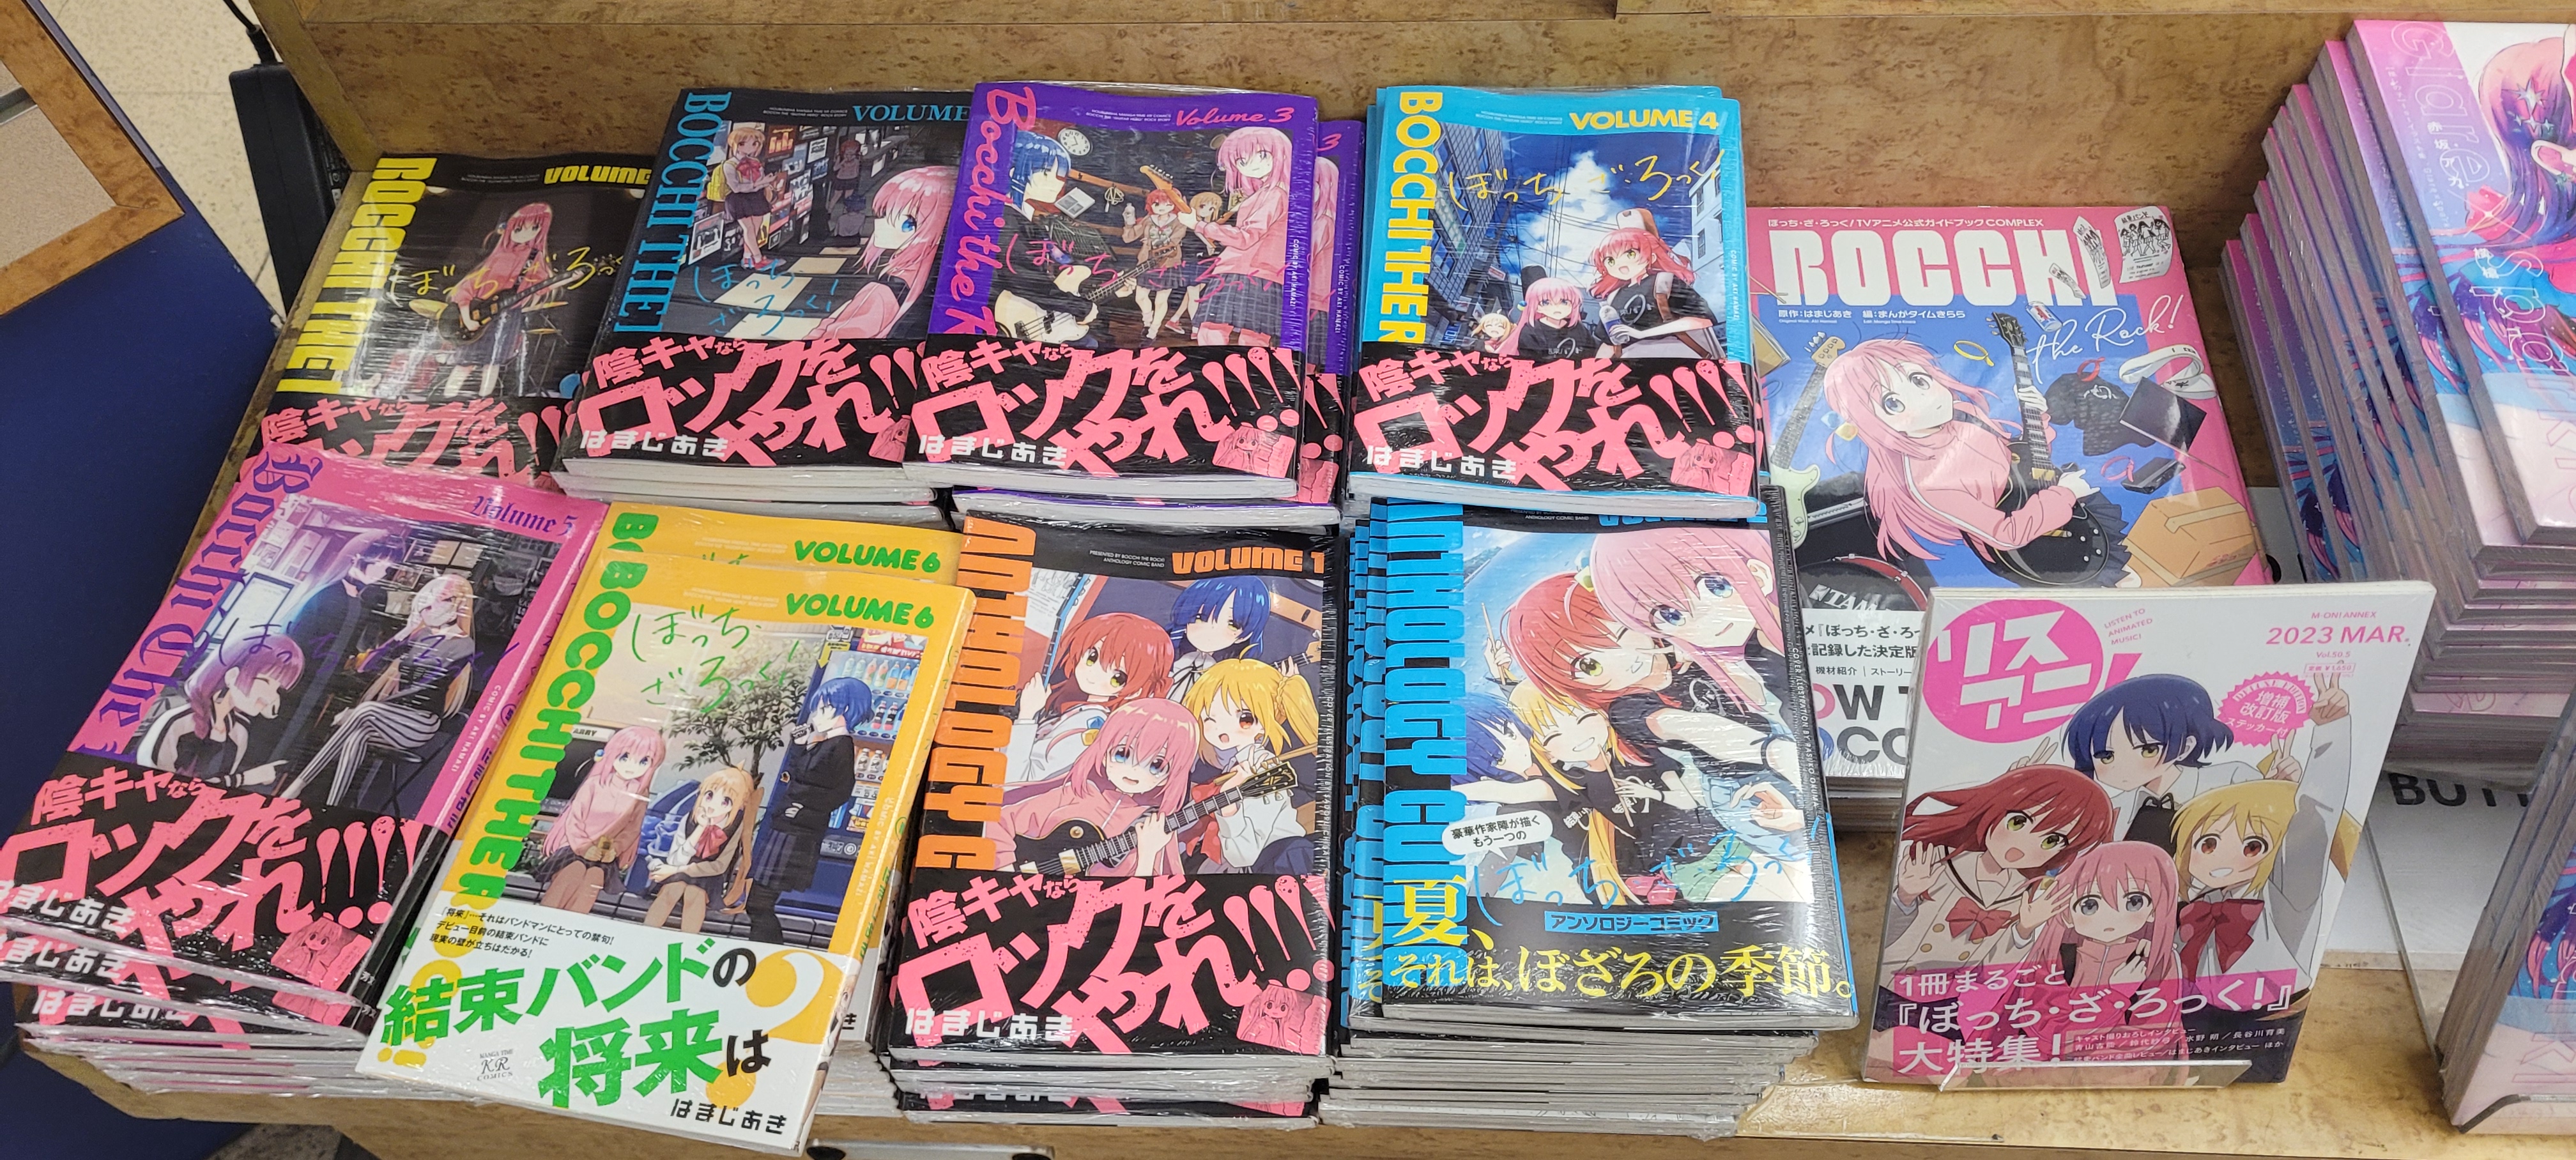 a photo of a retail display filled with various Bocchi the Rock books. these include all volumes of the manga currently out, as well as a volume of LisAni, an anime music magazine, published in March 2023, featuring the main cast on the cover.